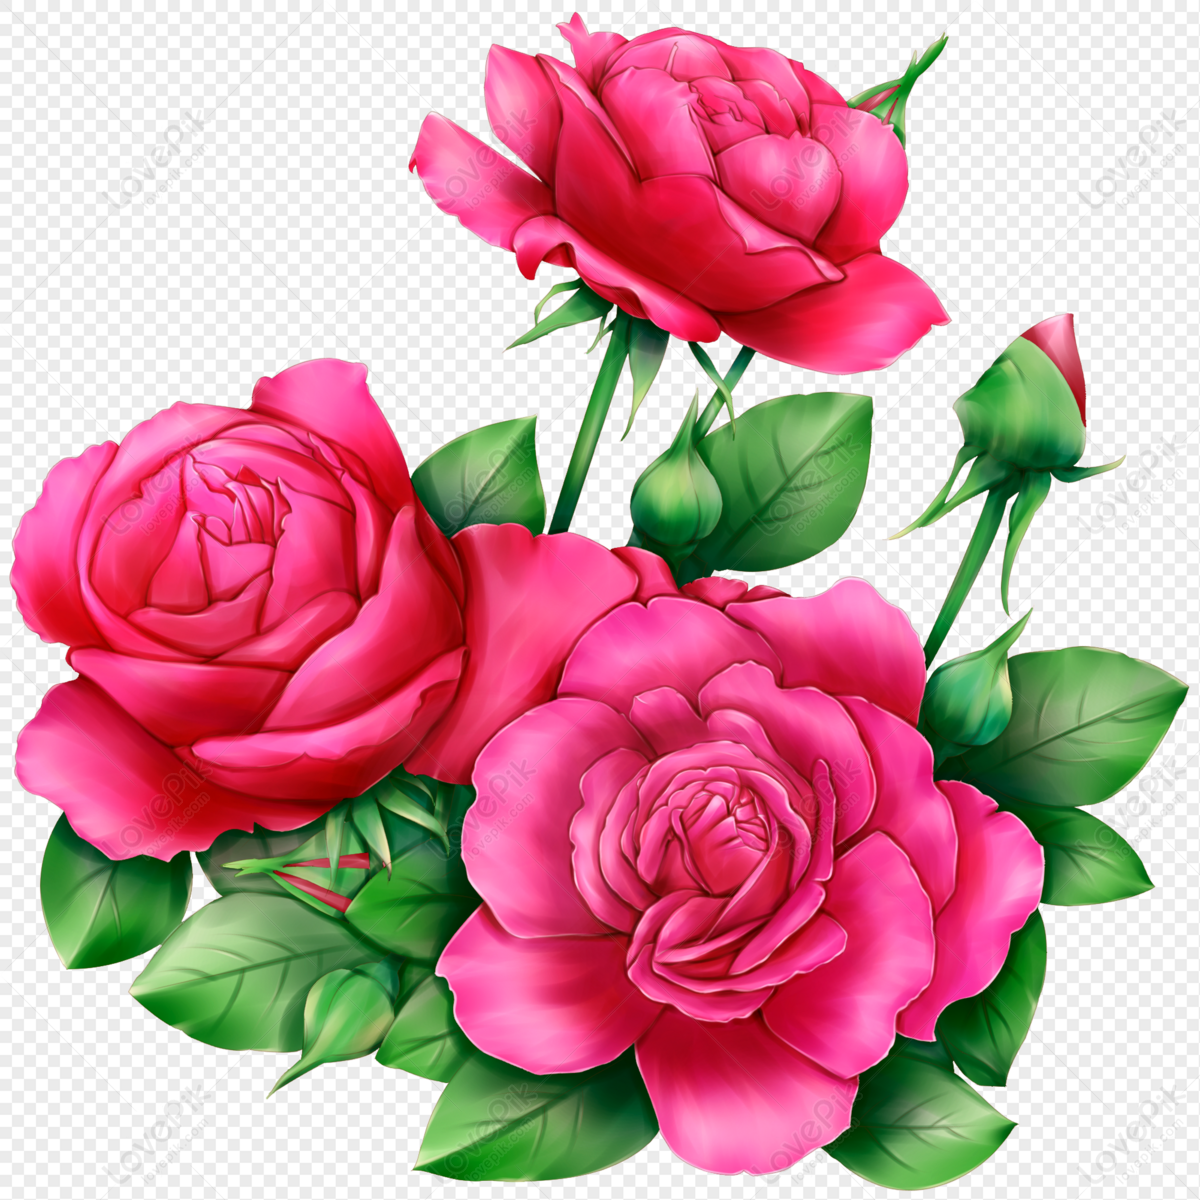 Rose Flowers PNG Images With Transparent Background | Free ...